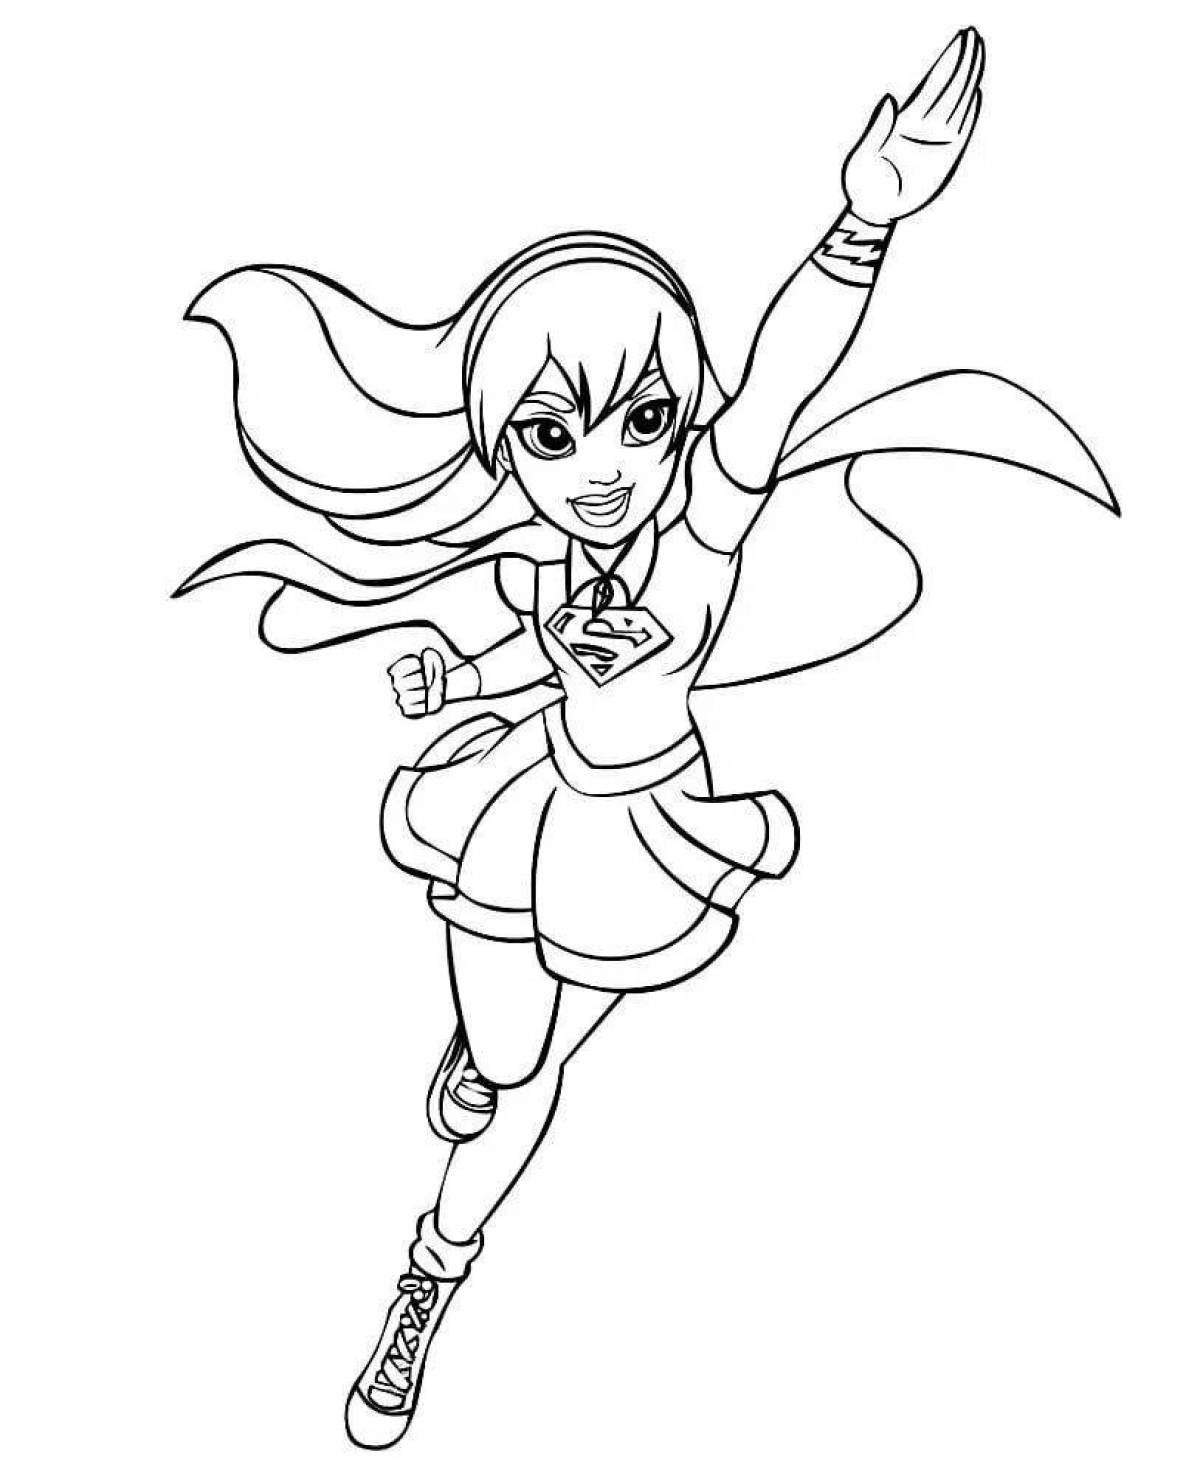 Coloring page funny superhero girls